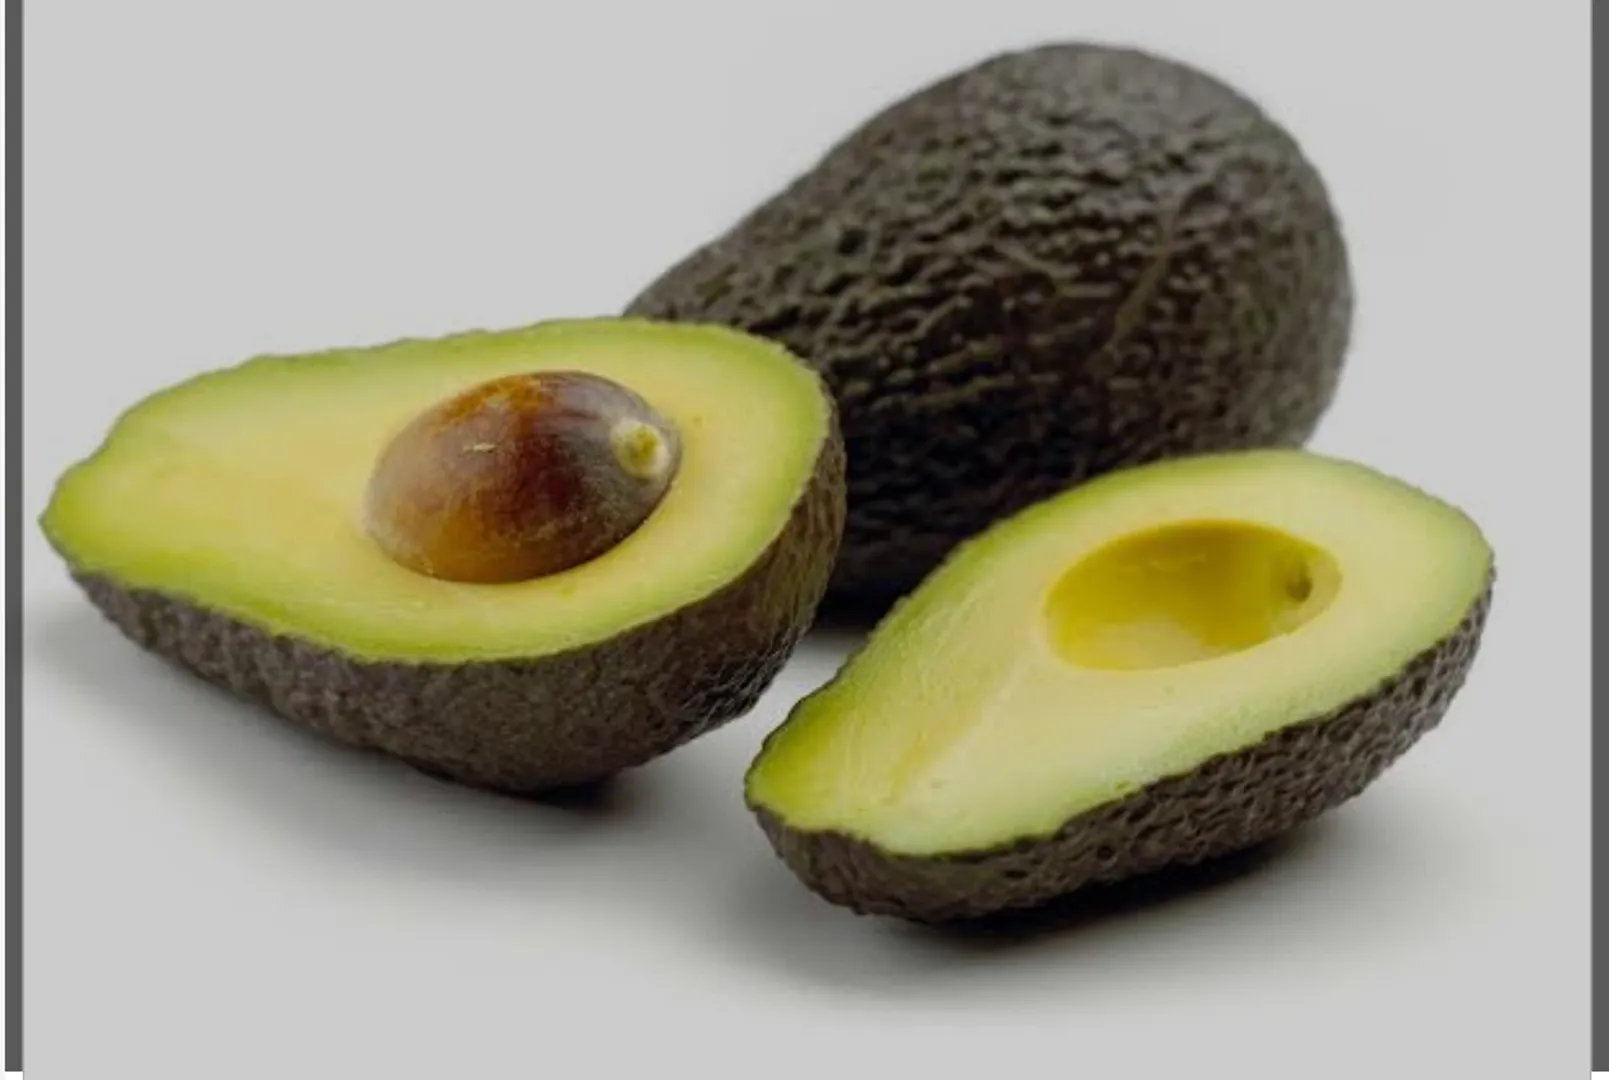 Avocado: A heart-healthy marvel rich in monounsaturated fats, potassium, and essential vitamins. With antioxidants and fiber, avocados support heart health, lower LDL cholesterol, and promote overall cardiovascular wellness. Embrace their versatility in salads, guacamole, and smoothies for a delicious and nutritious addition to your heart-healthy diet. 🥑❤️